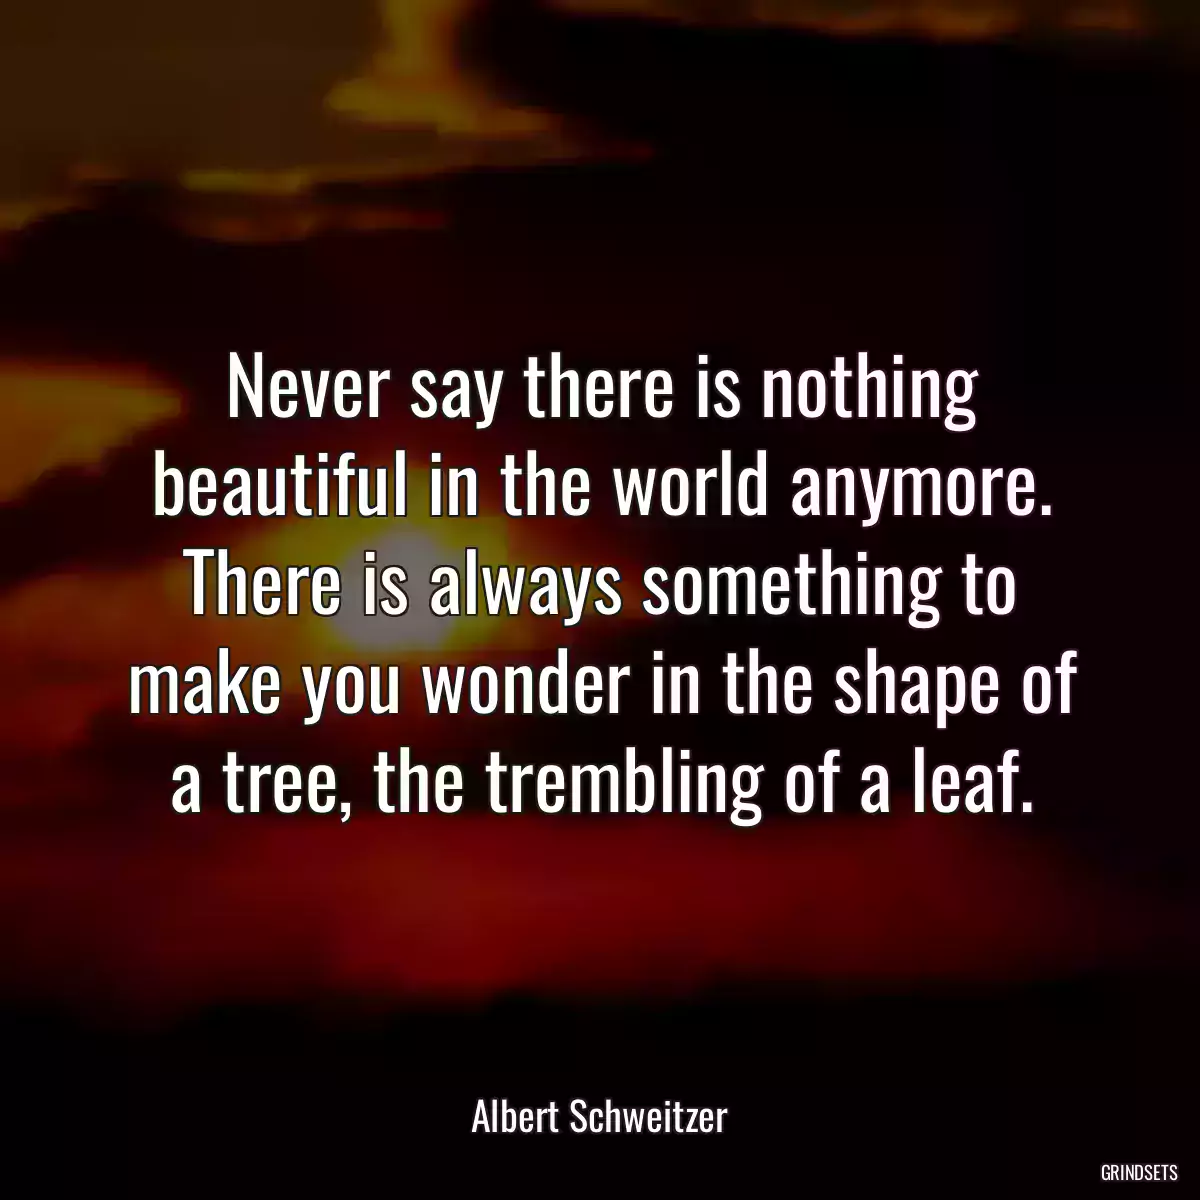 Never say there is nothing beautiful in the world anymore. There is always something to make you wonder in the shape of a tree, the trembling of a leaf.